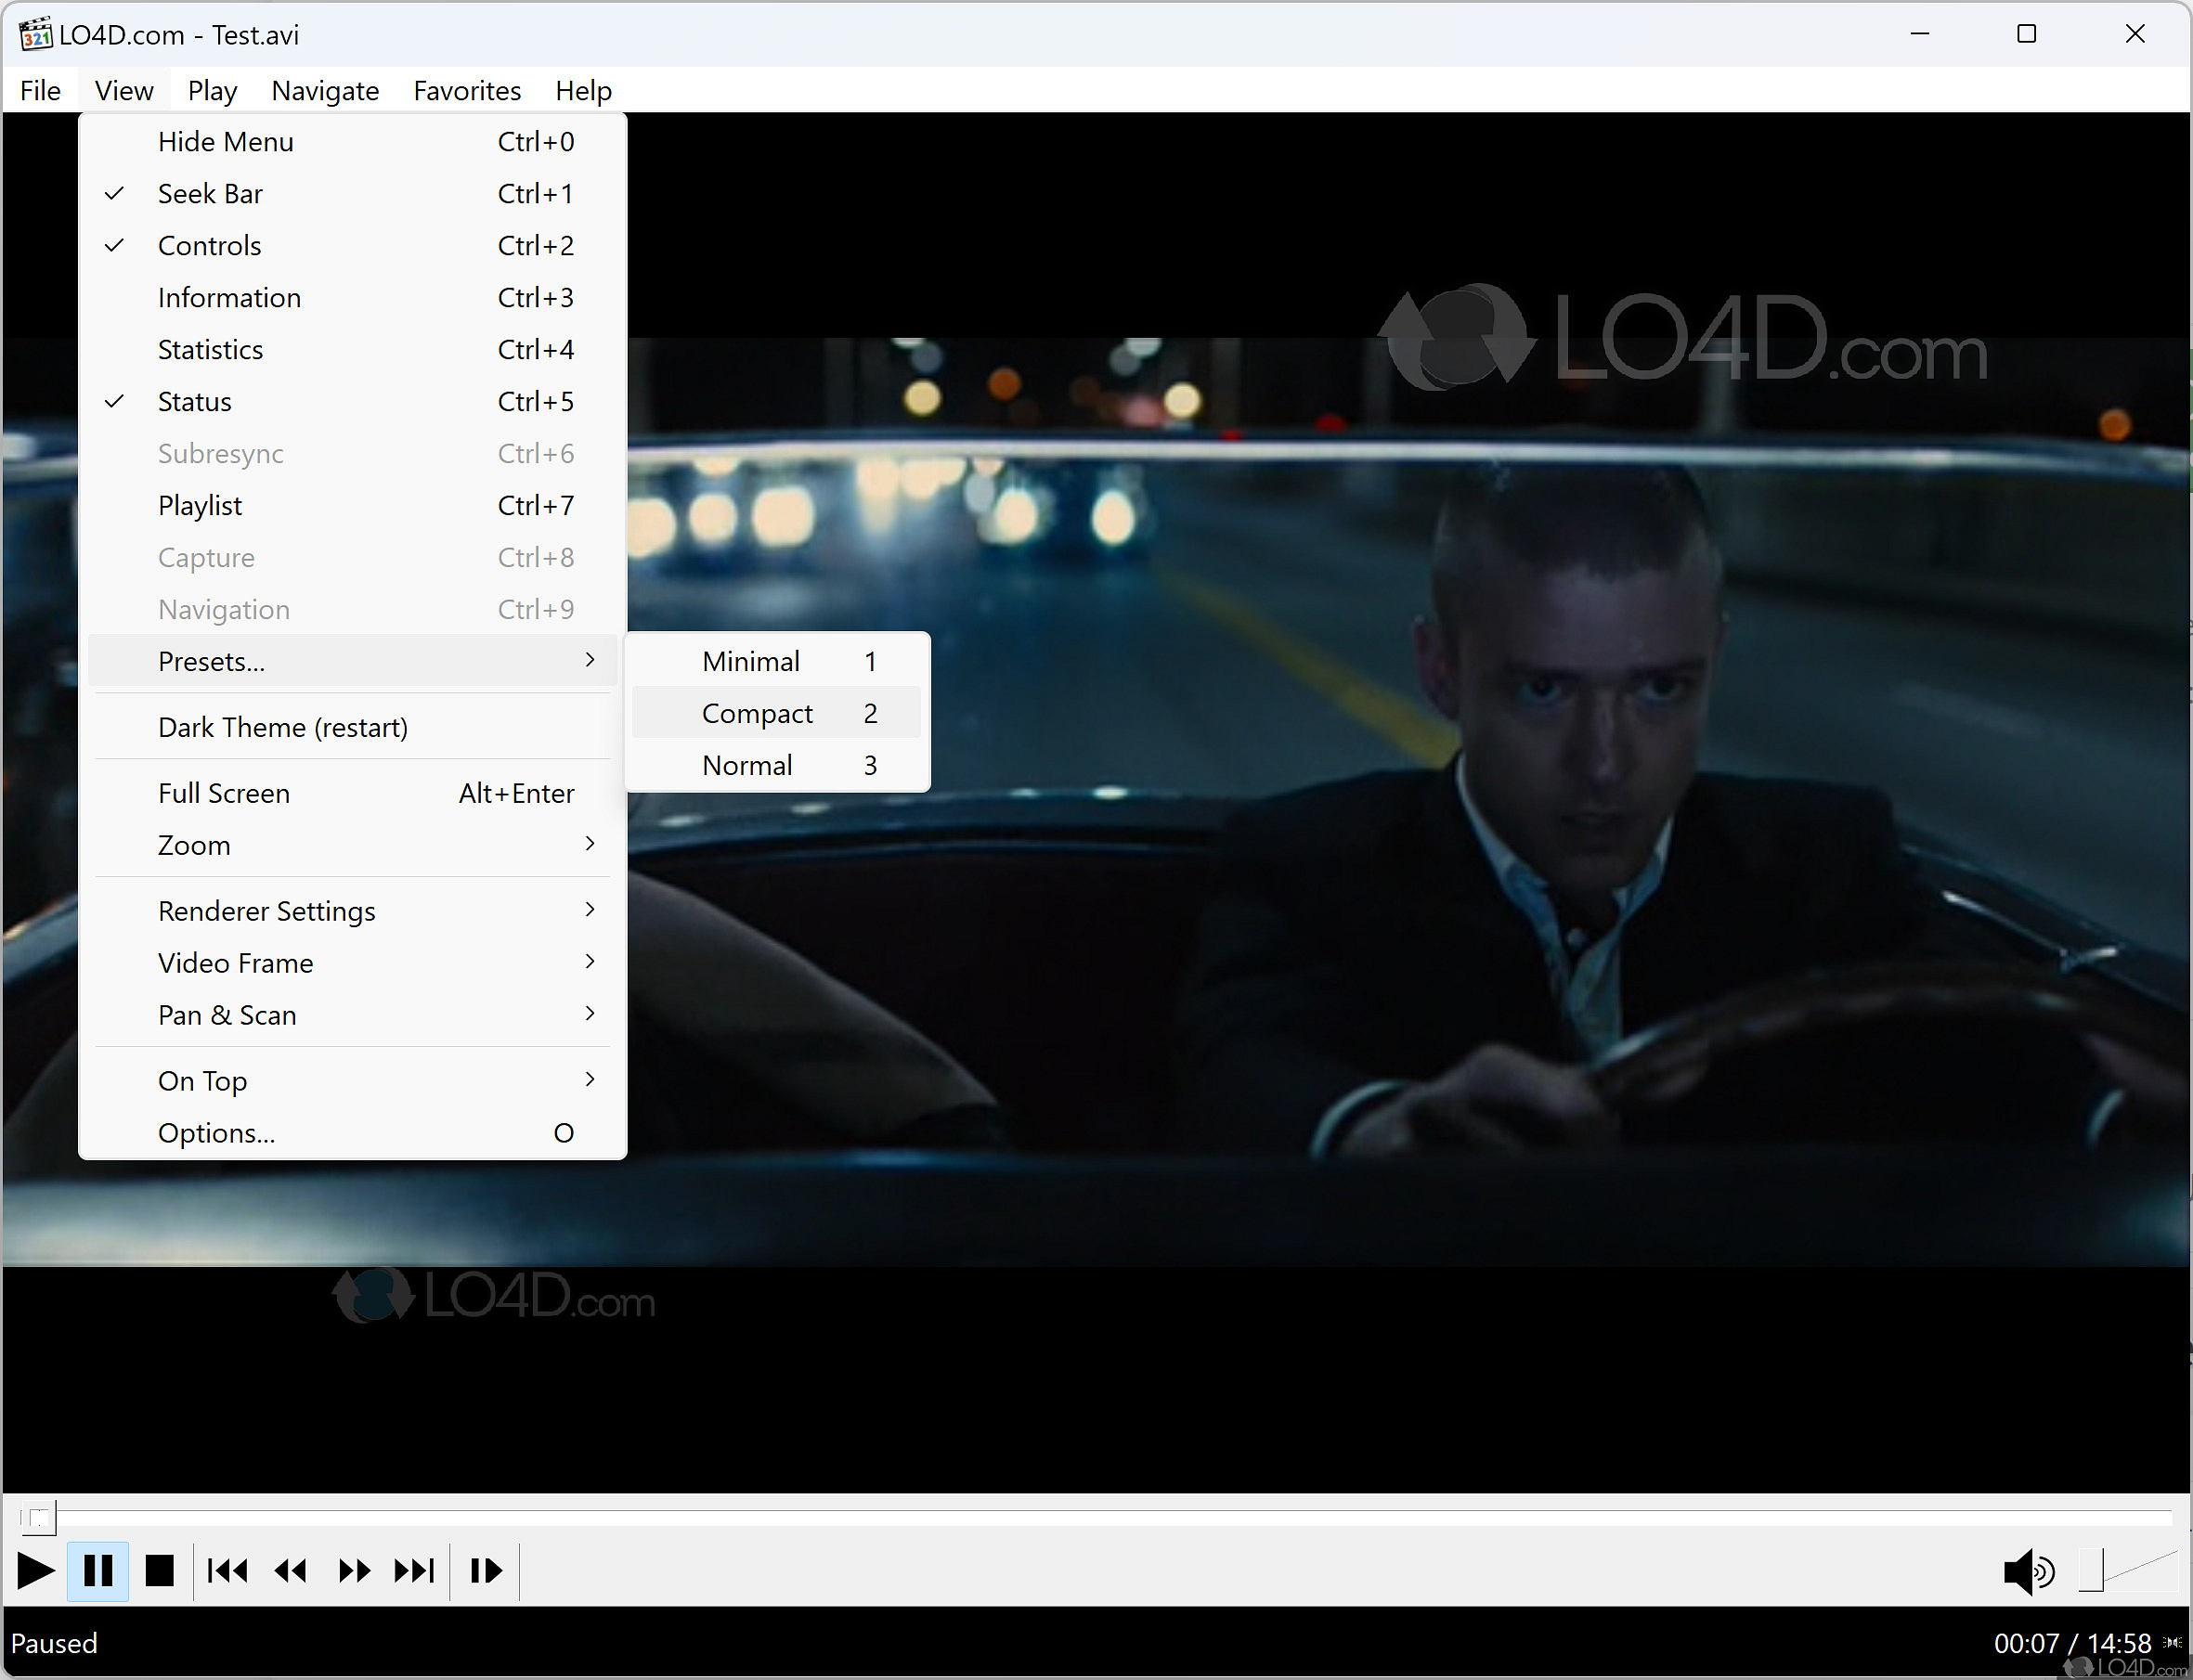 download the last version for android Media Player Classic (Home Cinema) 2.1.2